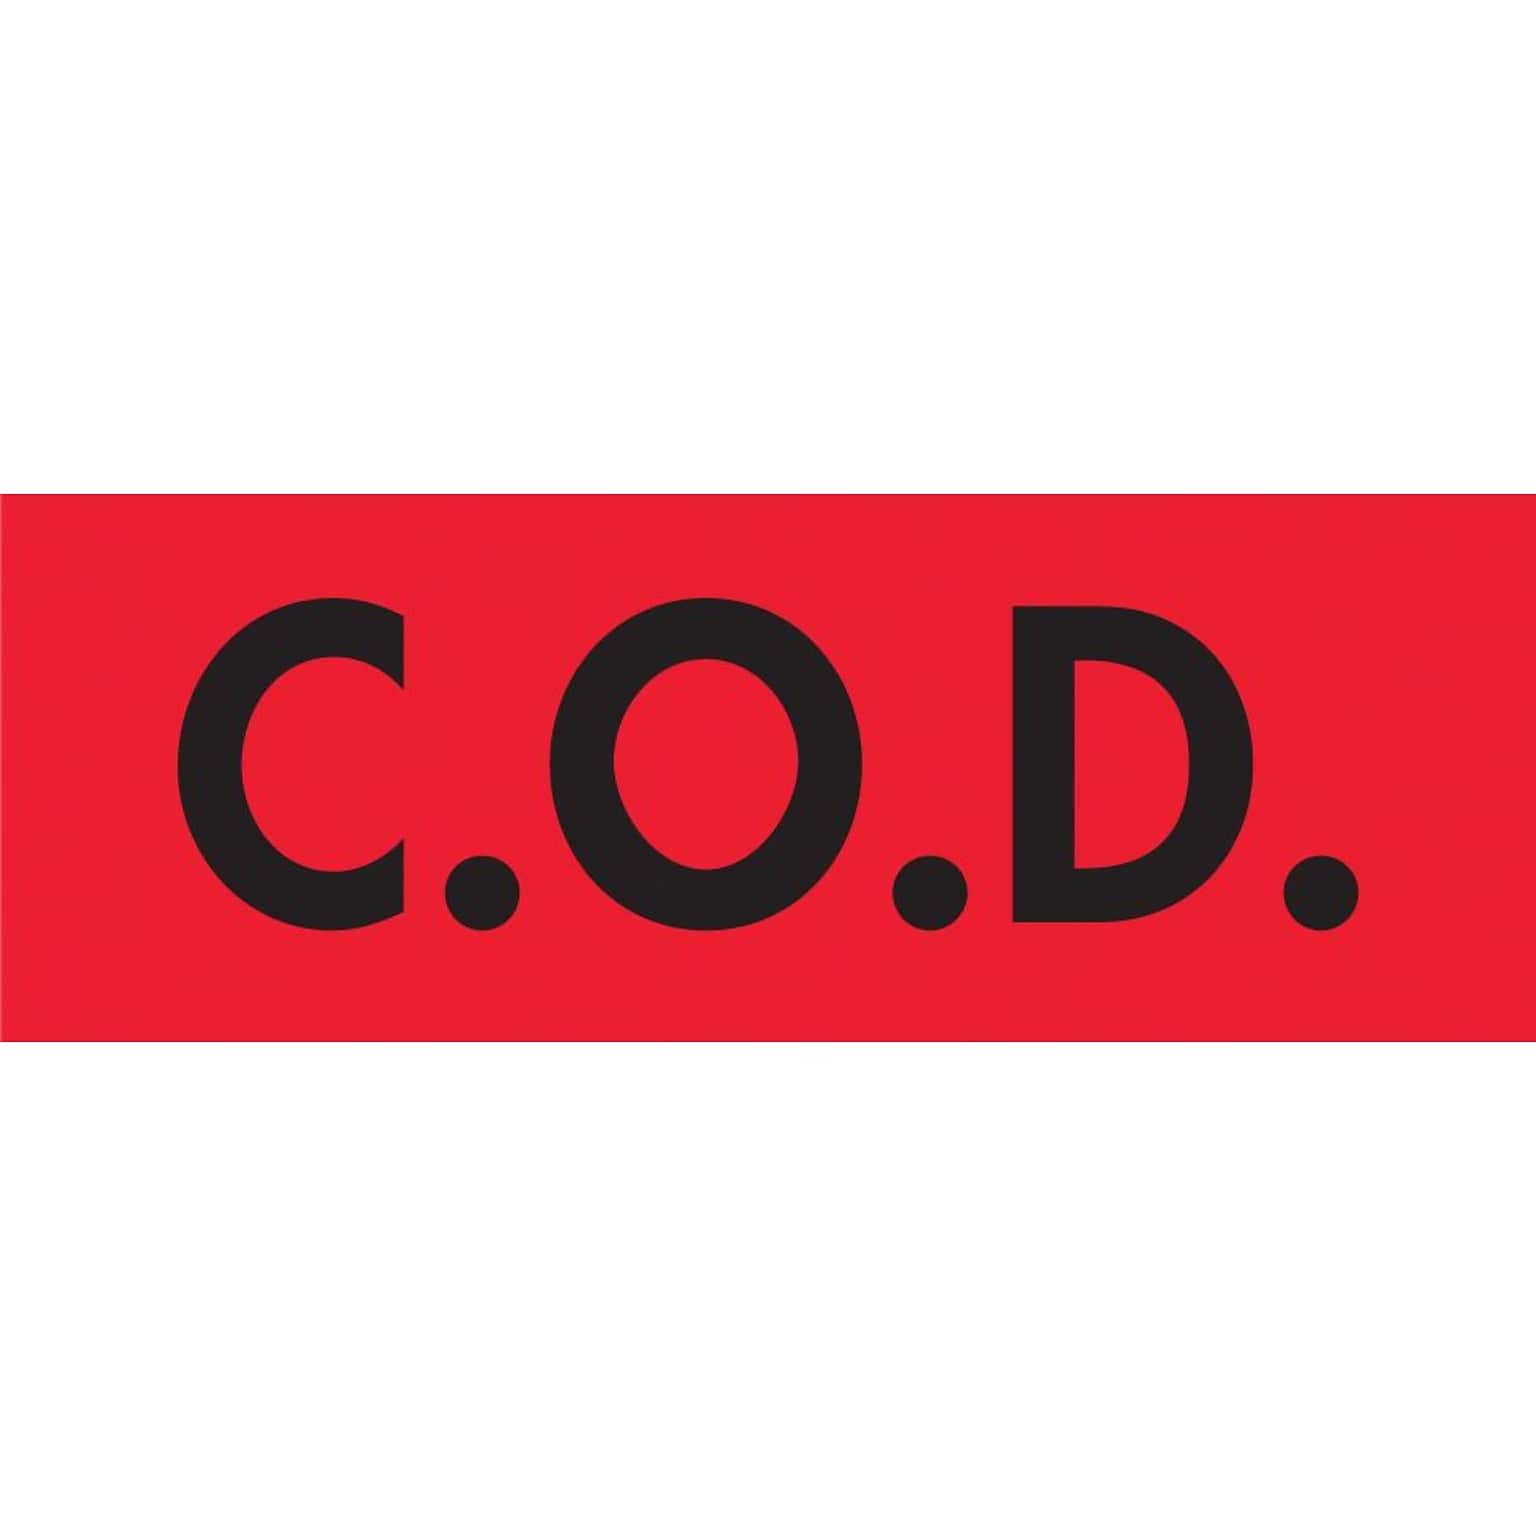 Quill Brand® C.O.D. Labels, Red/Black, 3 x 2, 500/Rl